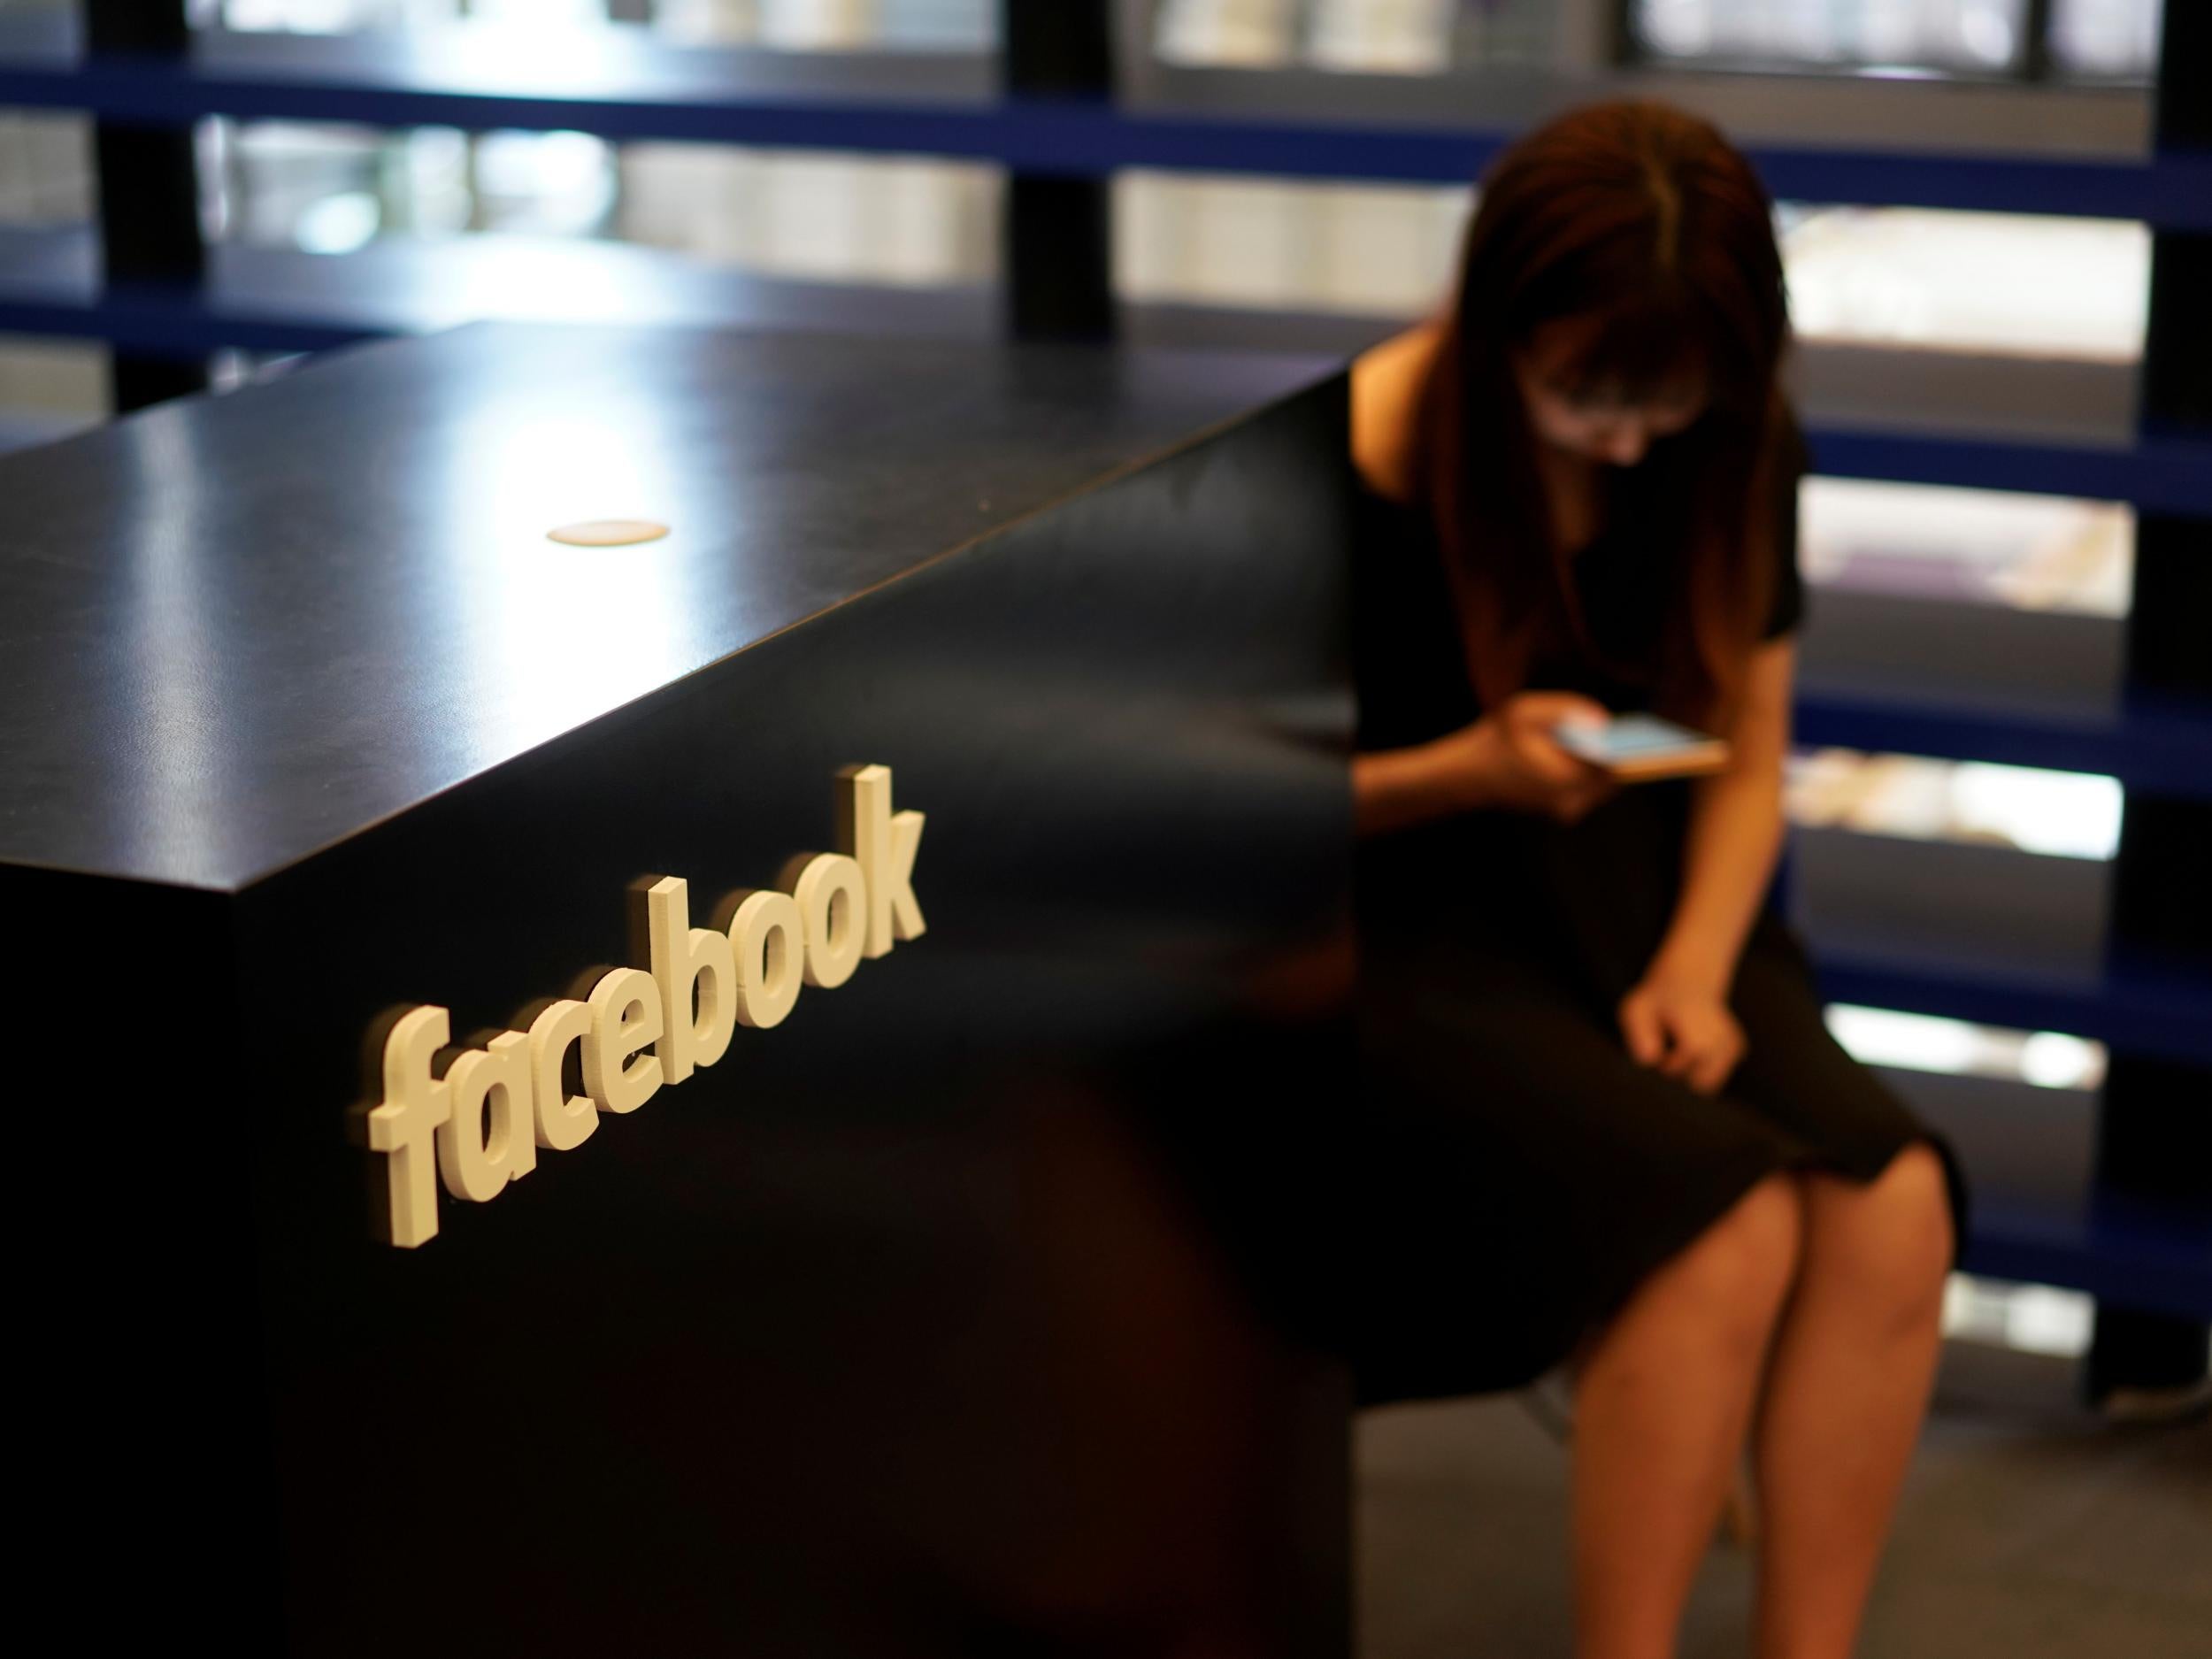 A Facebook sign is seen during the China Digital Entertainment Expo and Conference, 3 August 2018